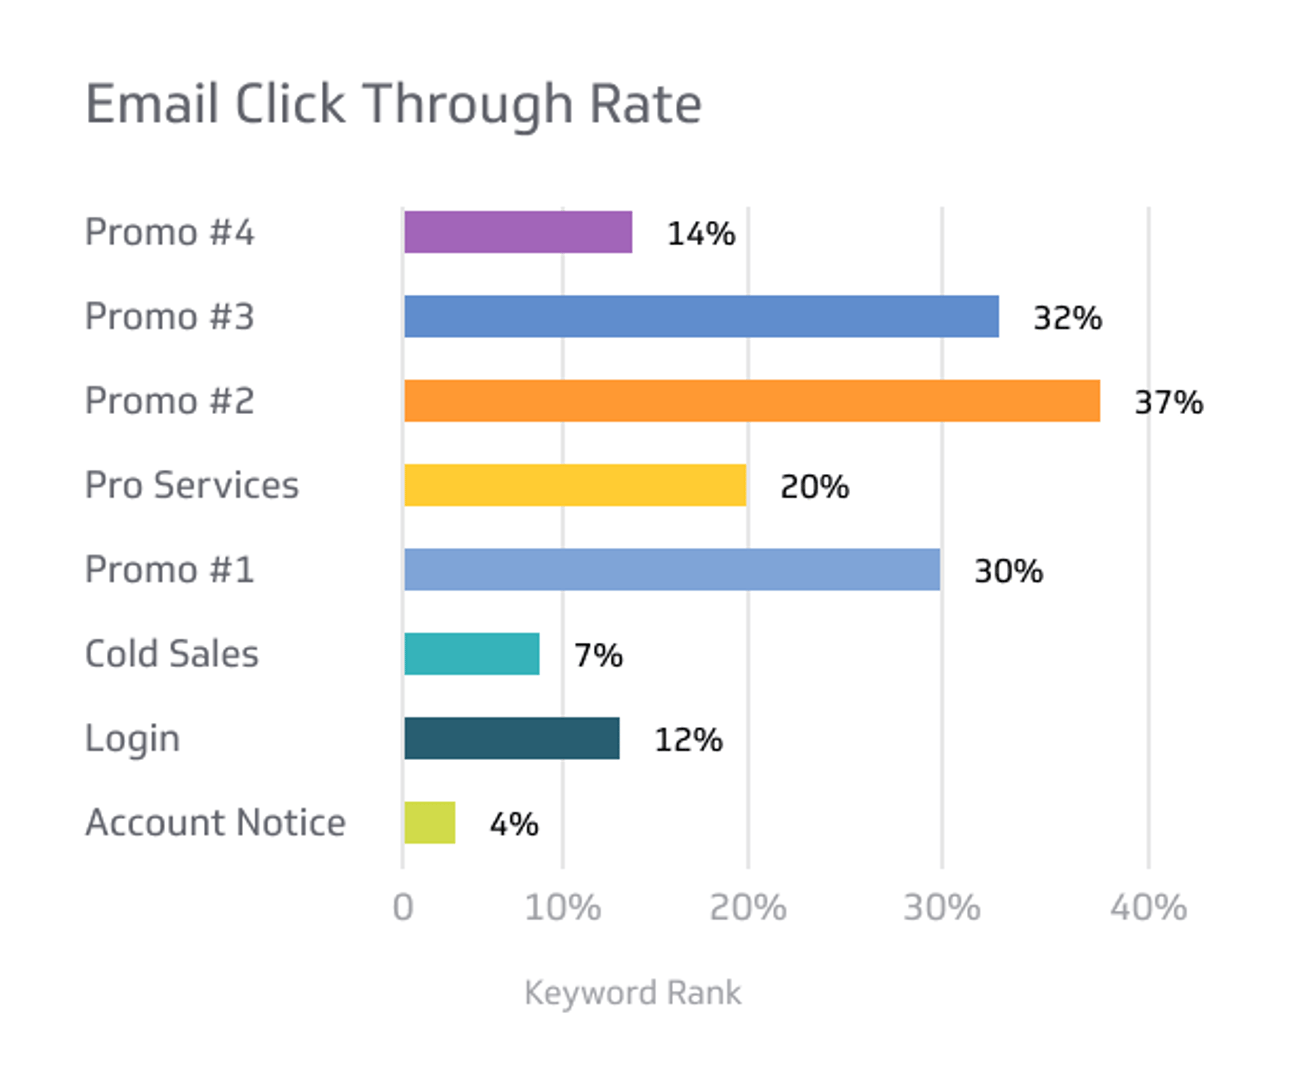 Related KPI Examples - Email Click Through Rate (CTR) Metric